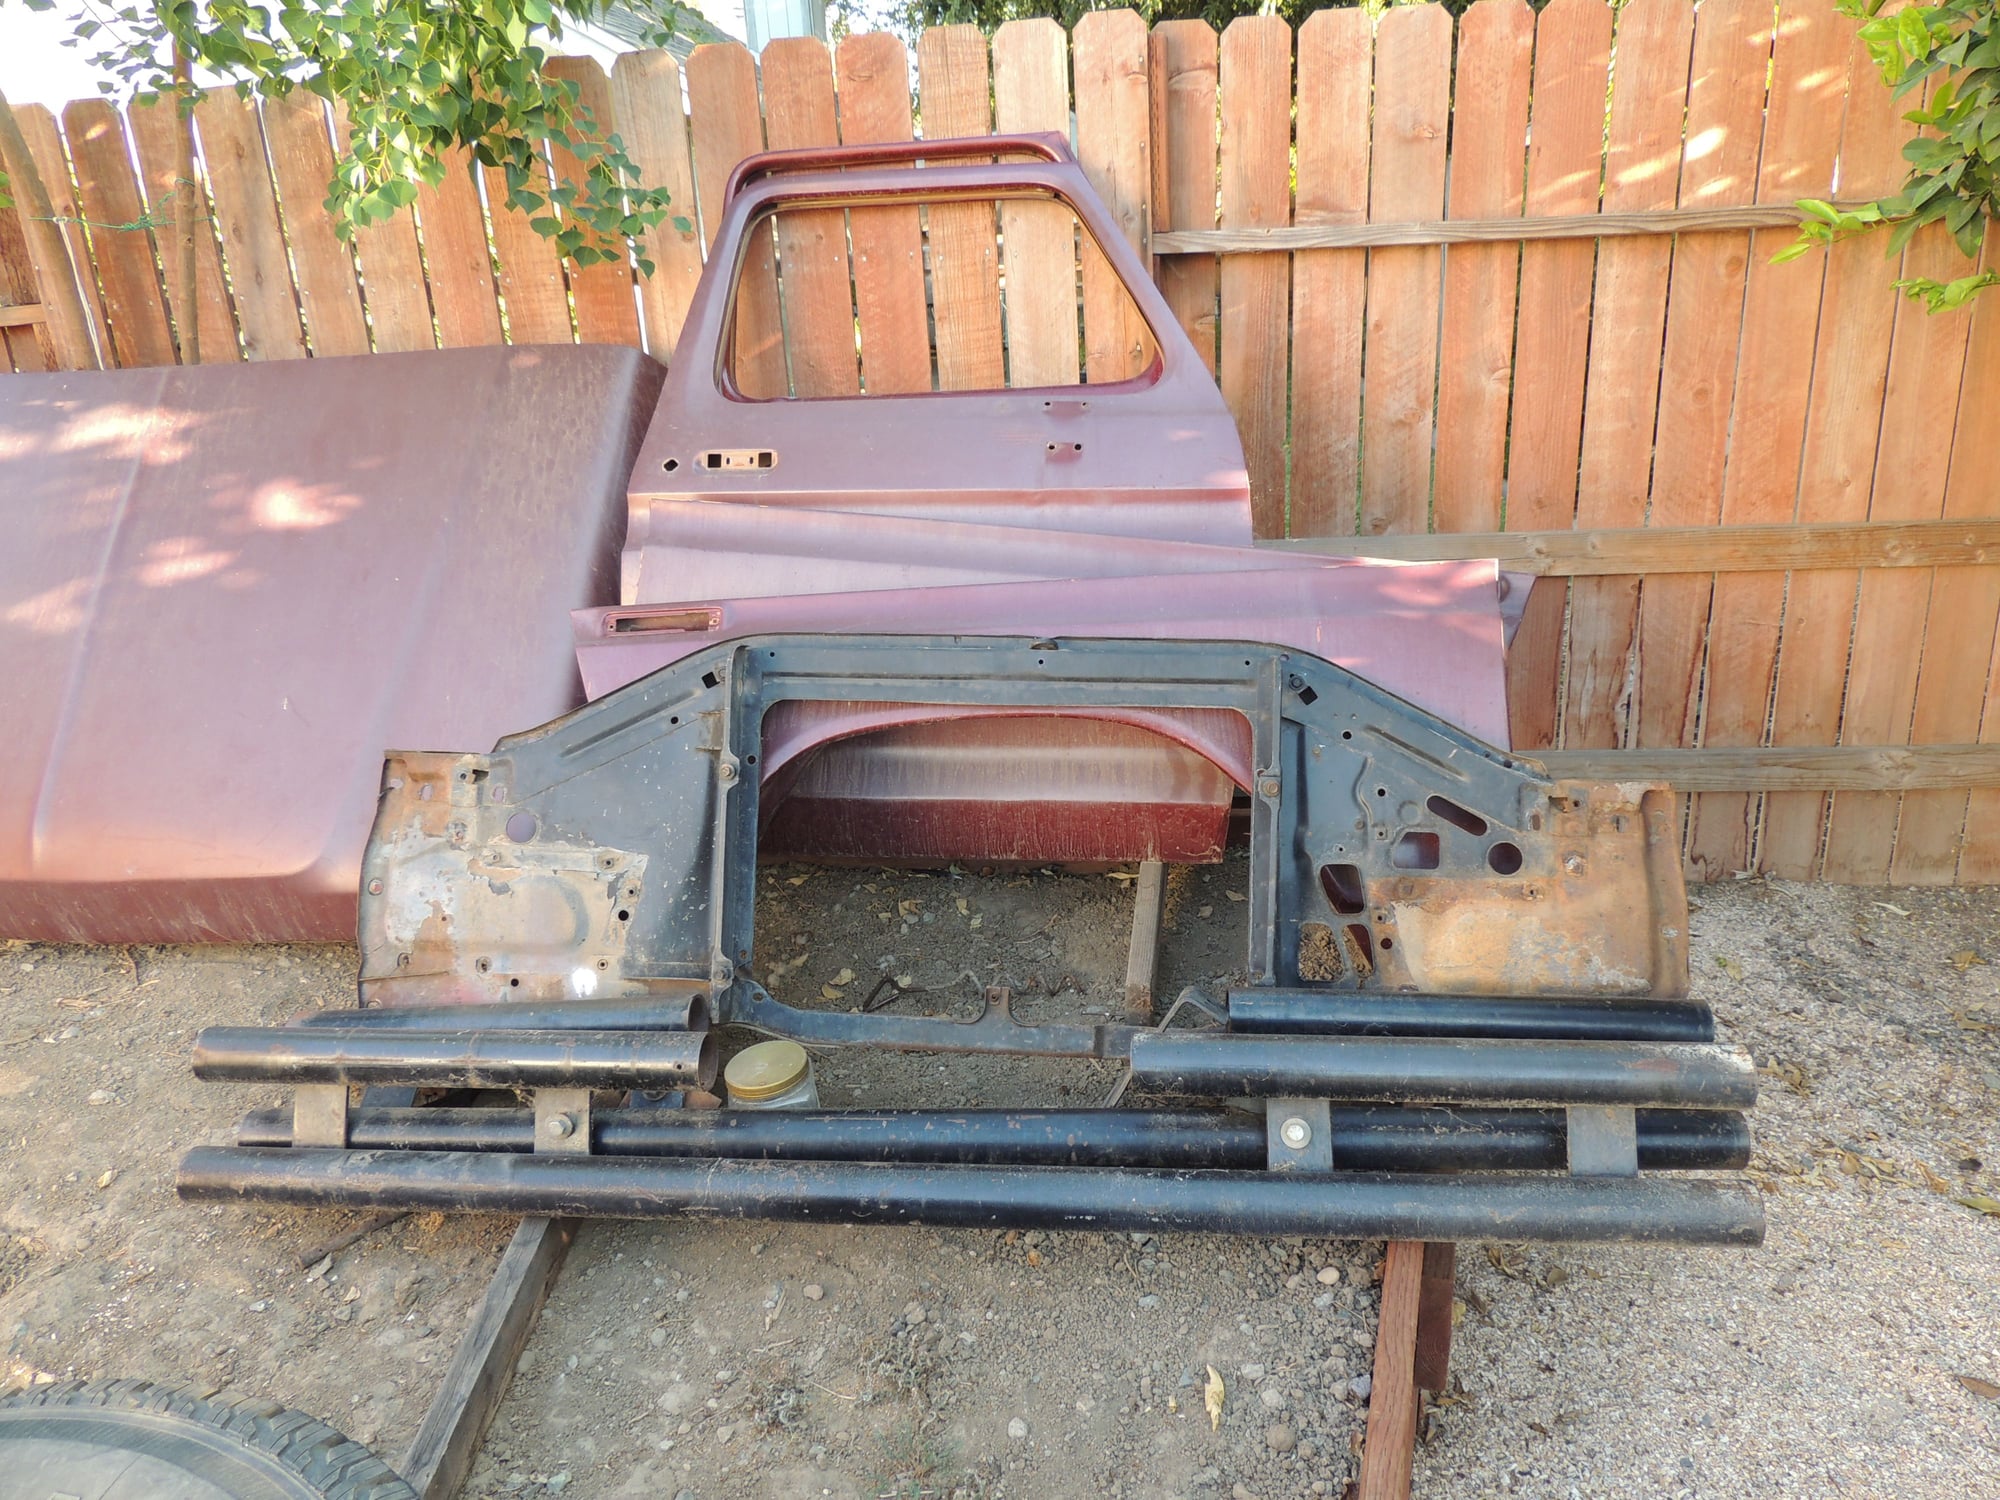 1976 Ford F-100 - Do you like to build models? Full rig torn down to the frame ready for prep, paint and assembly! - Used - VIN Ford F100 360 - 150,000 Miles - 8 cyl - 4WD - Manual - Truck - Purple - Yuba City, CA 95993, United States